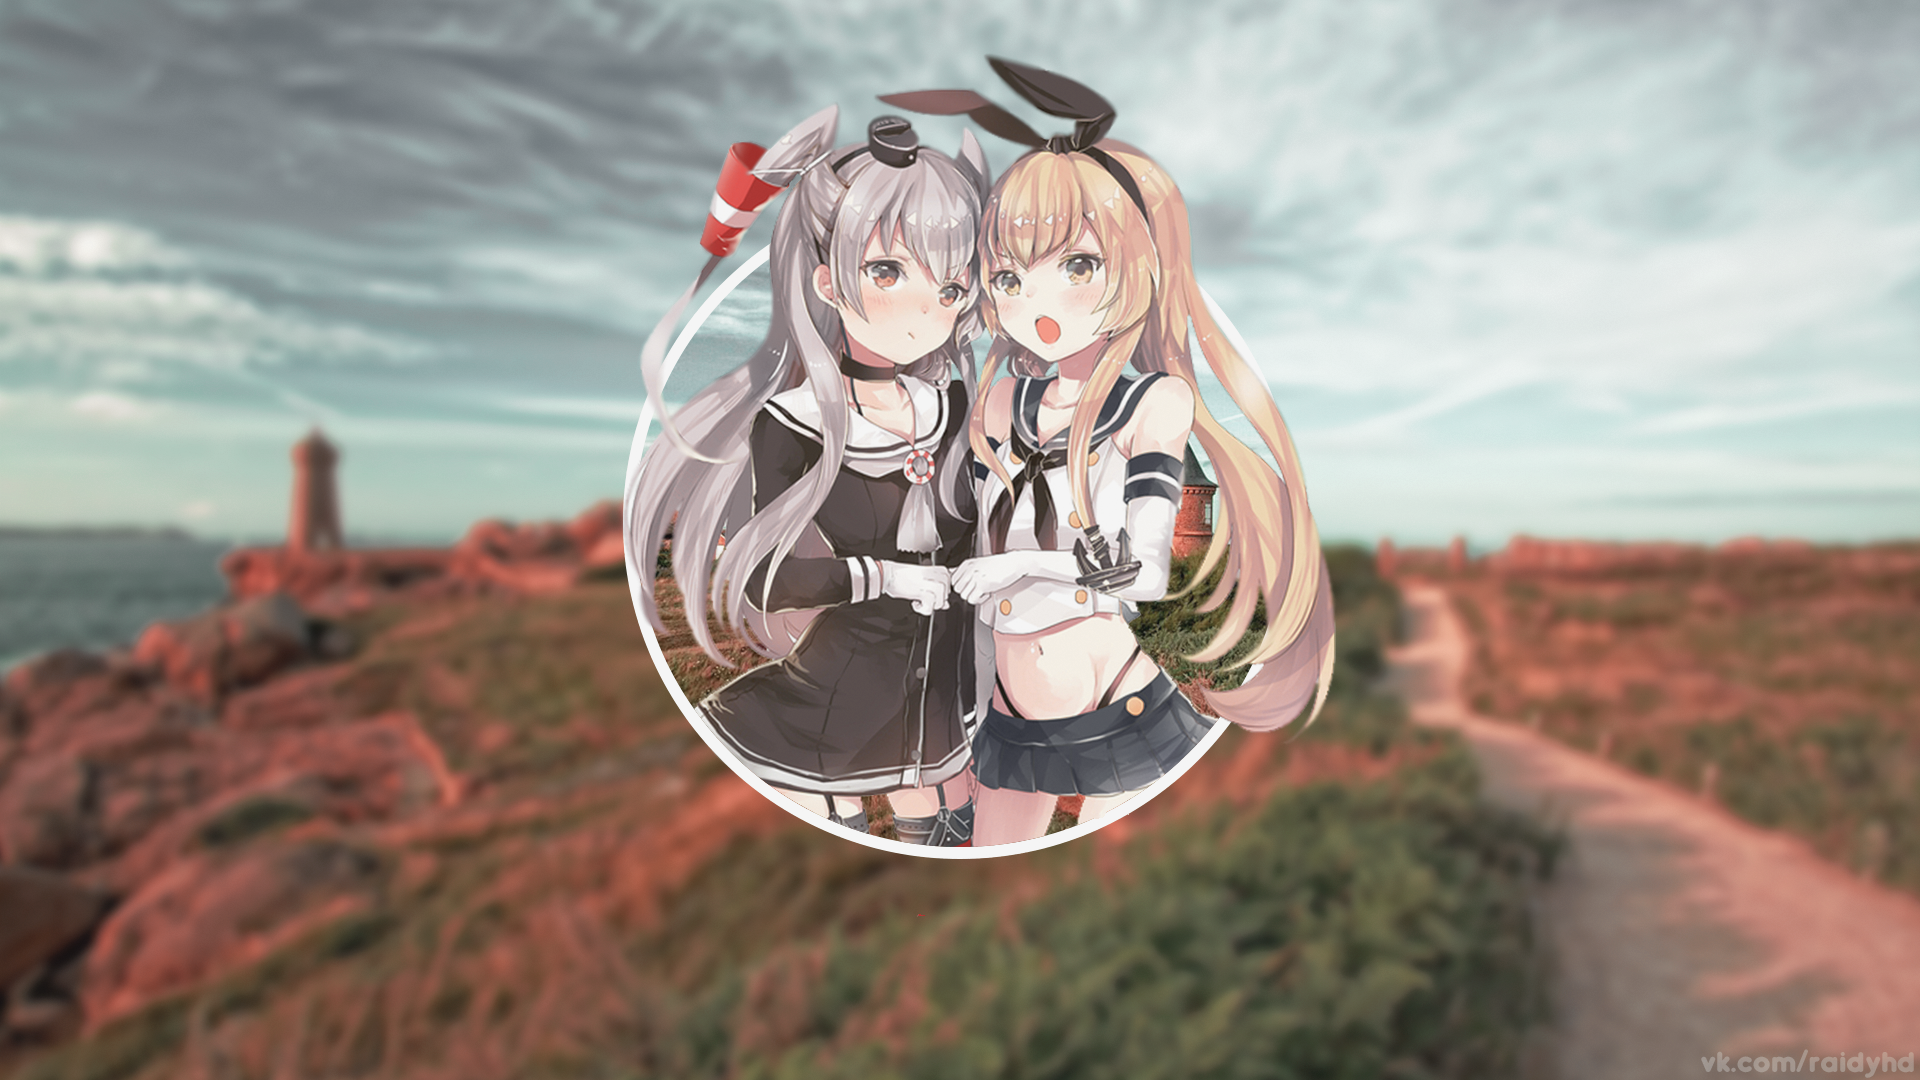 Anime 1920x1080 anime anime girls Kantai Collection Shimakaze (Kancolle) Amatsukaze (Kancolle) picture-in-picture watermarked